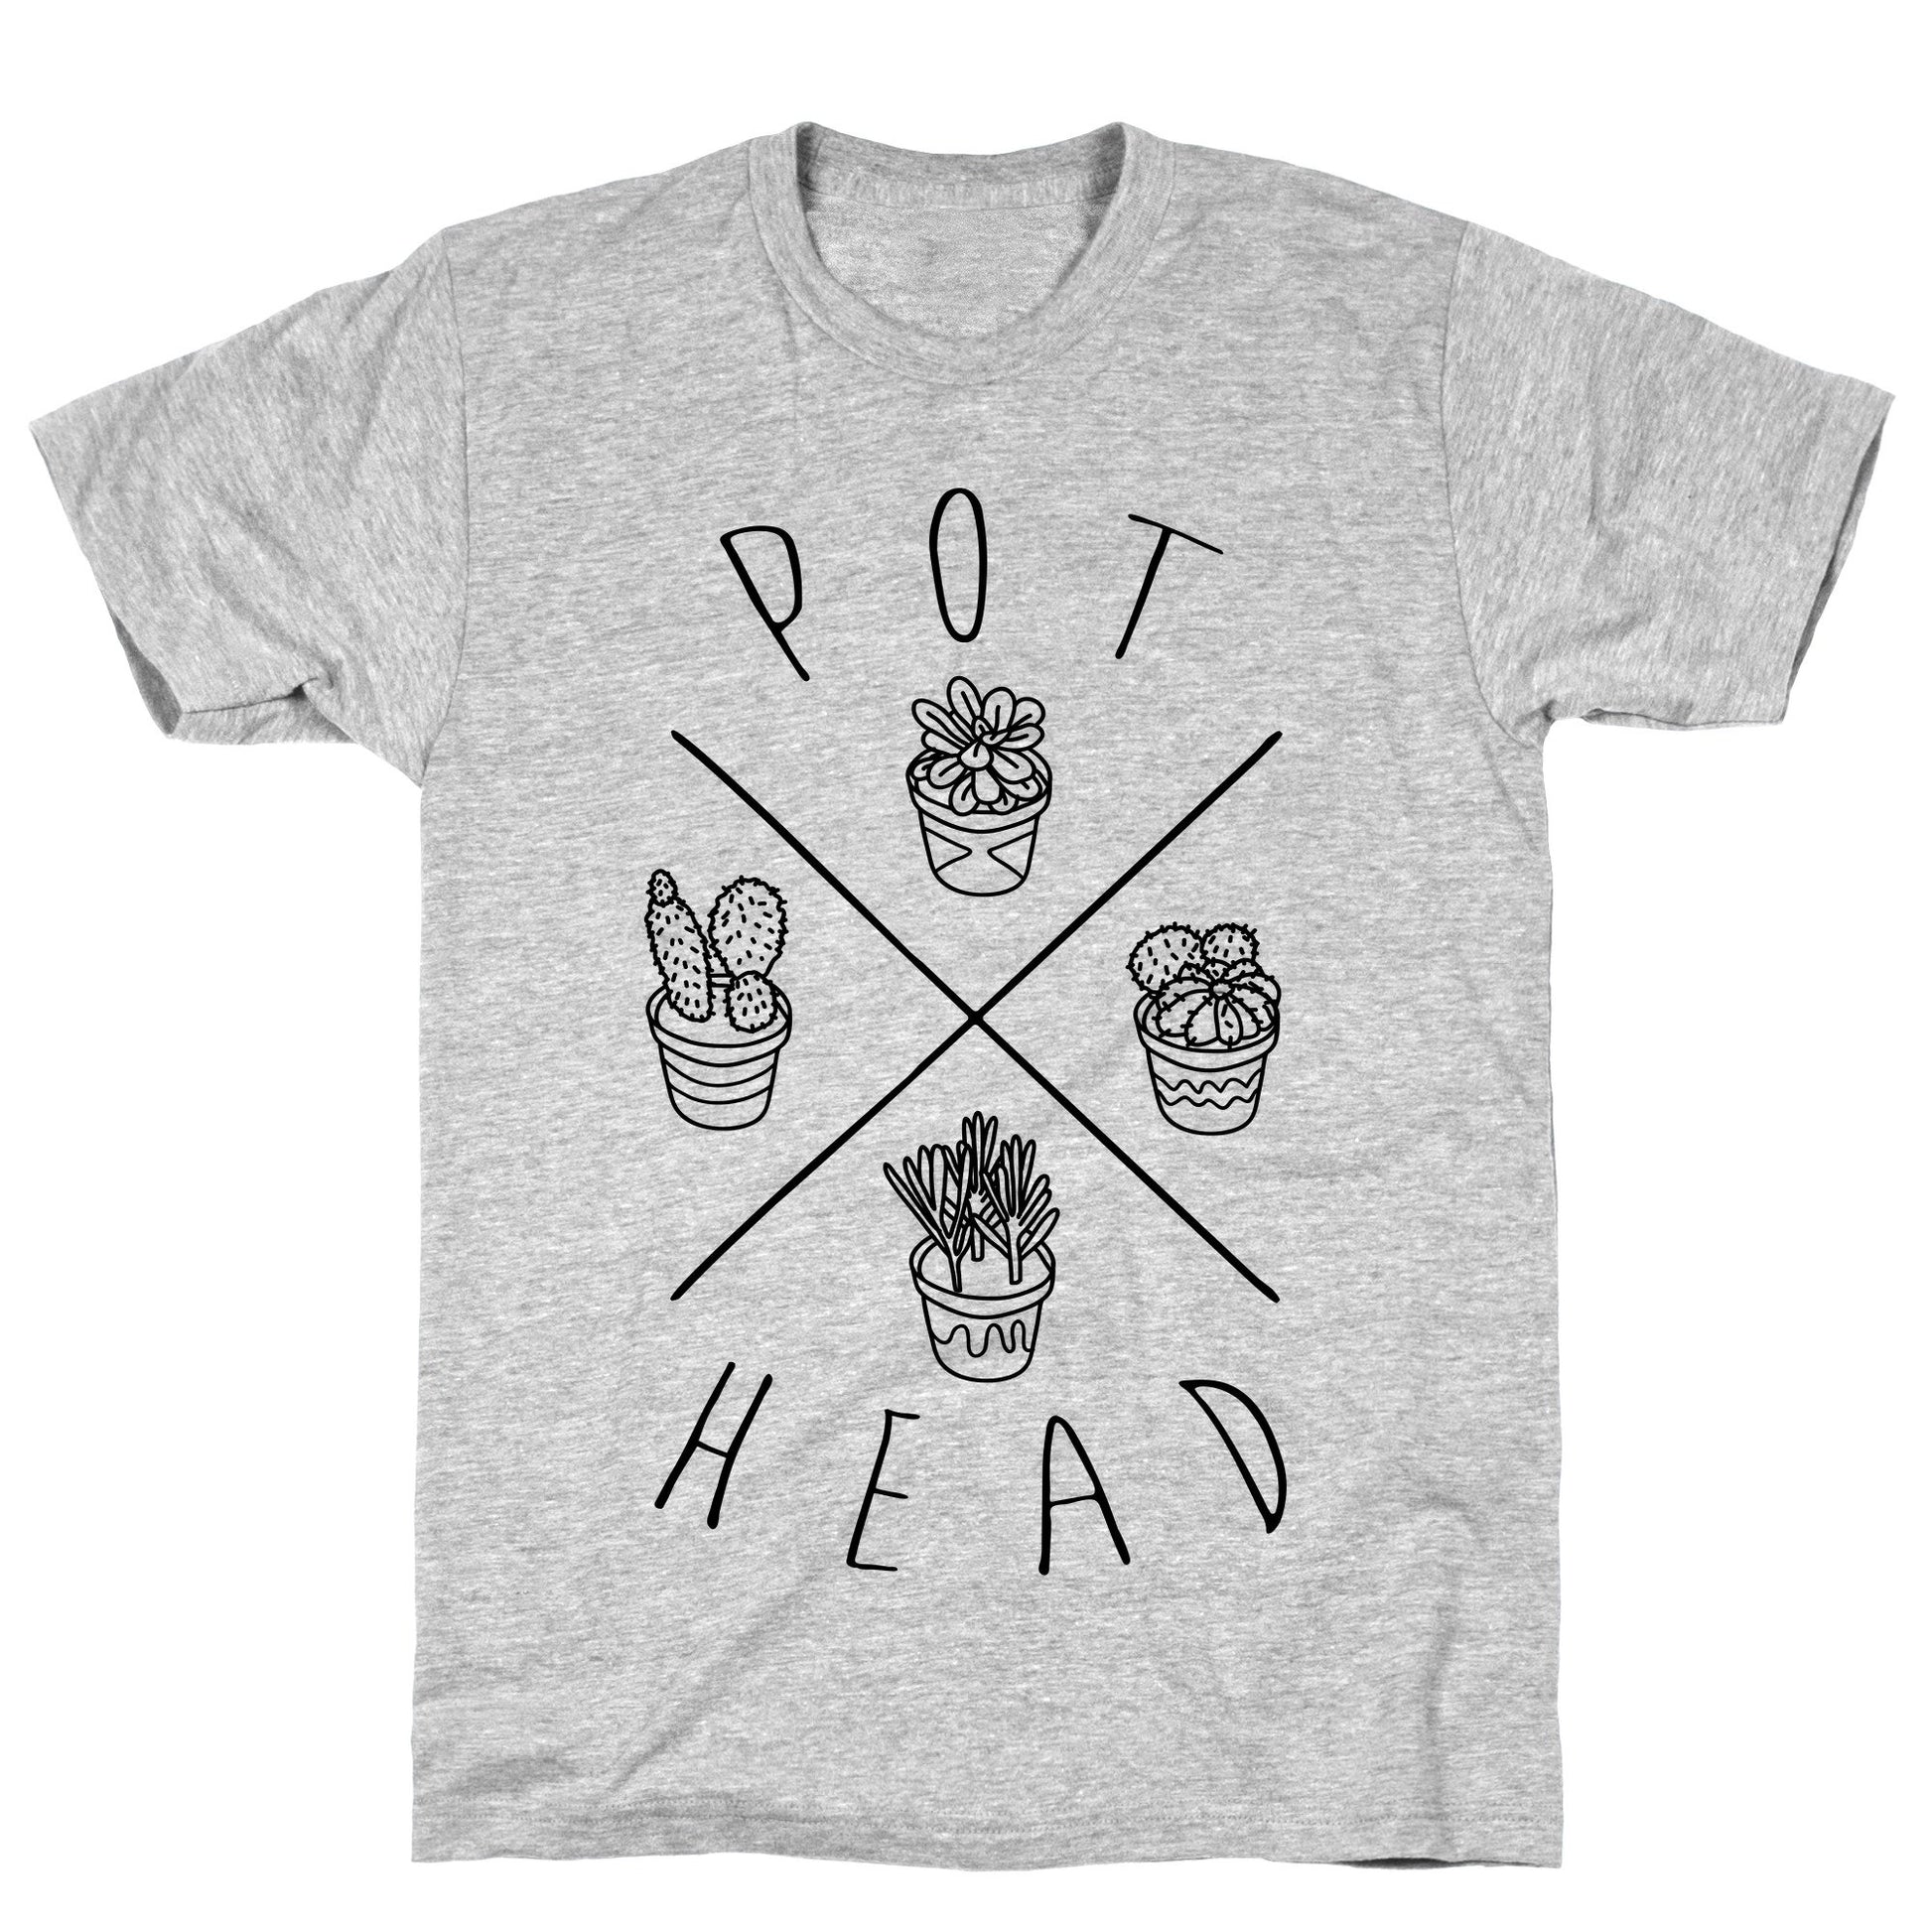 Pot Head Succulents Athletic Gray Unisex Cotton Tee Flower Power Packages Gray 2X 